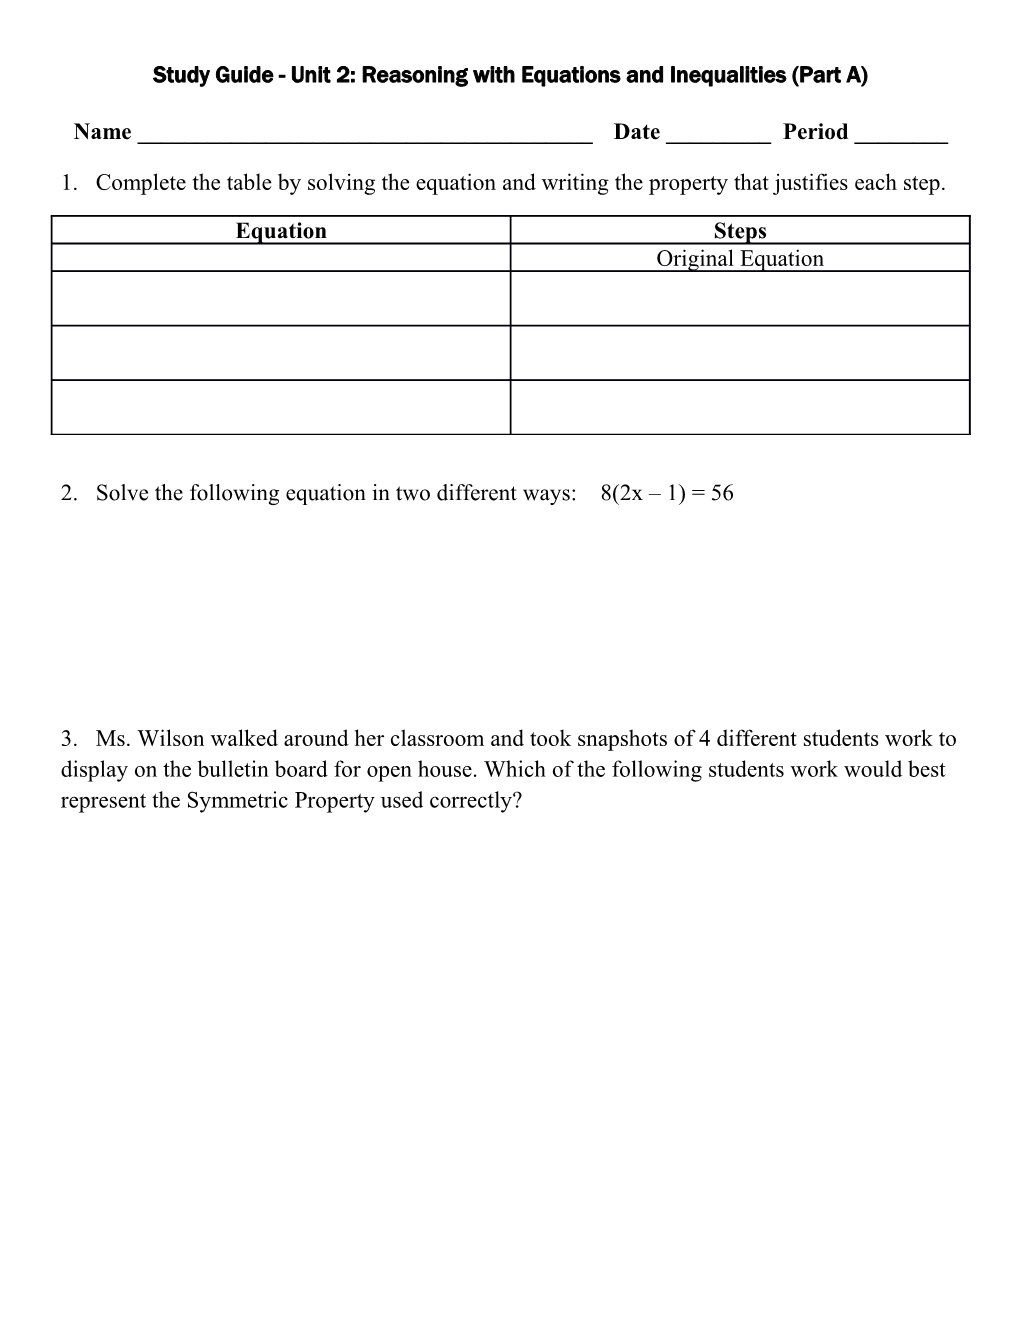 Study Guide - Unit 2: Reasoning with Equations and Inequalities (Part A)